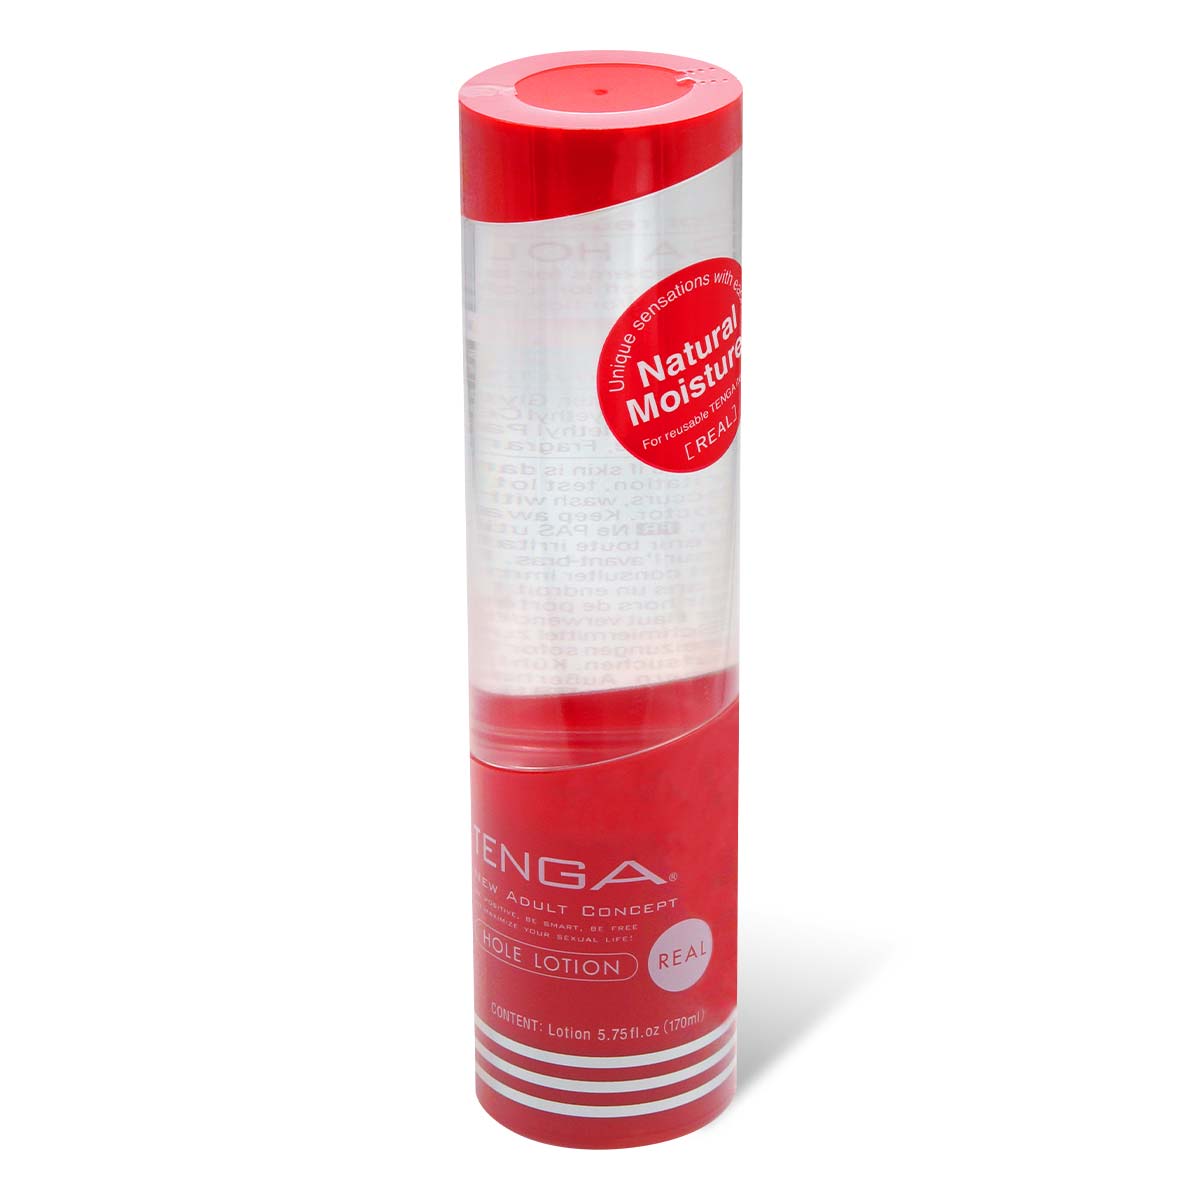 TENGA HOLE LOTION REAL 170ml Water-based Lubricant-p_1